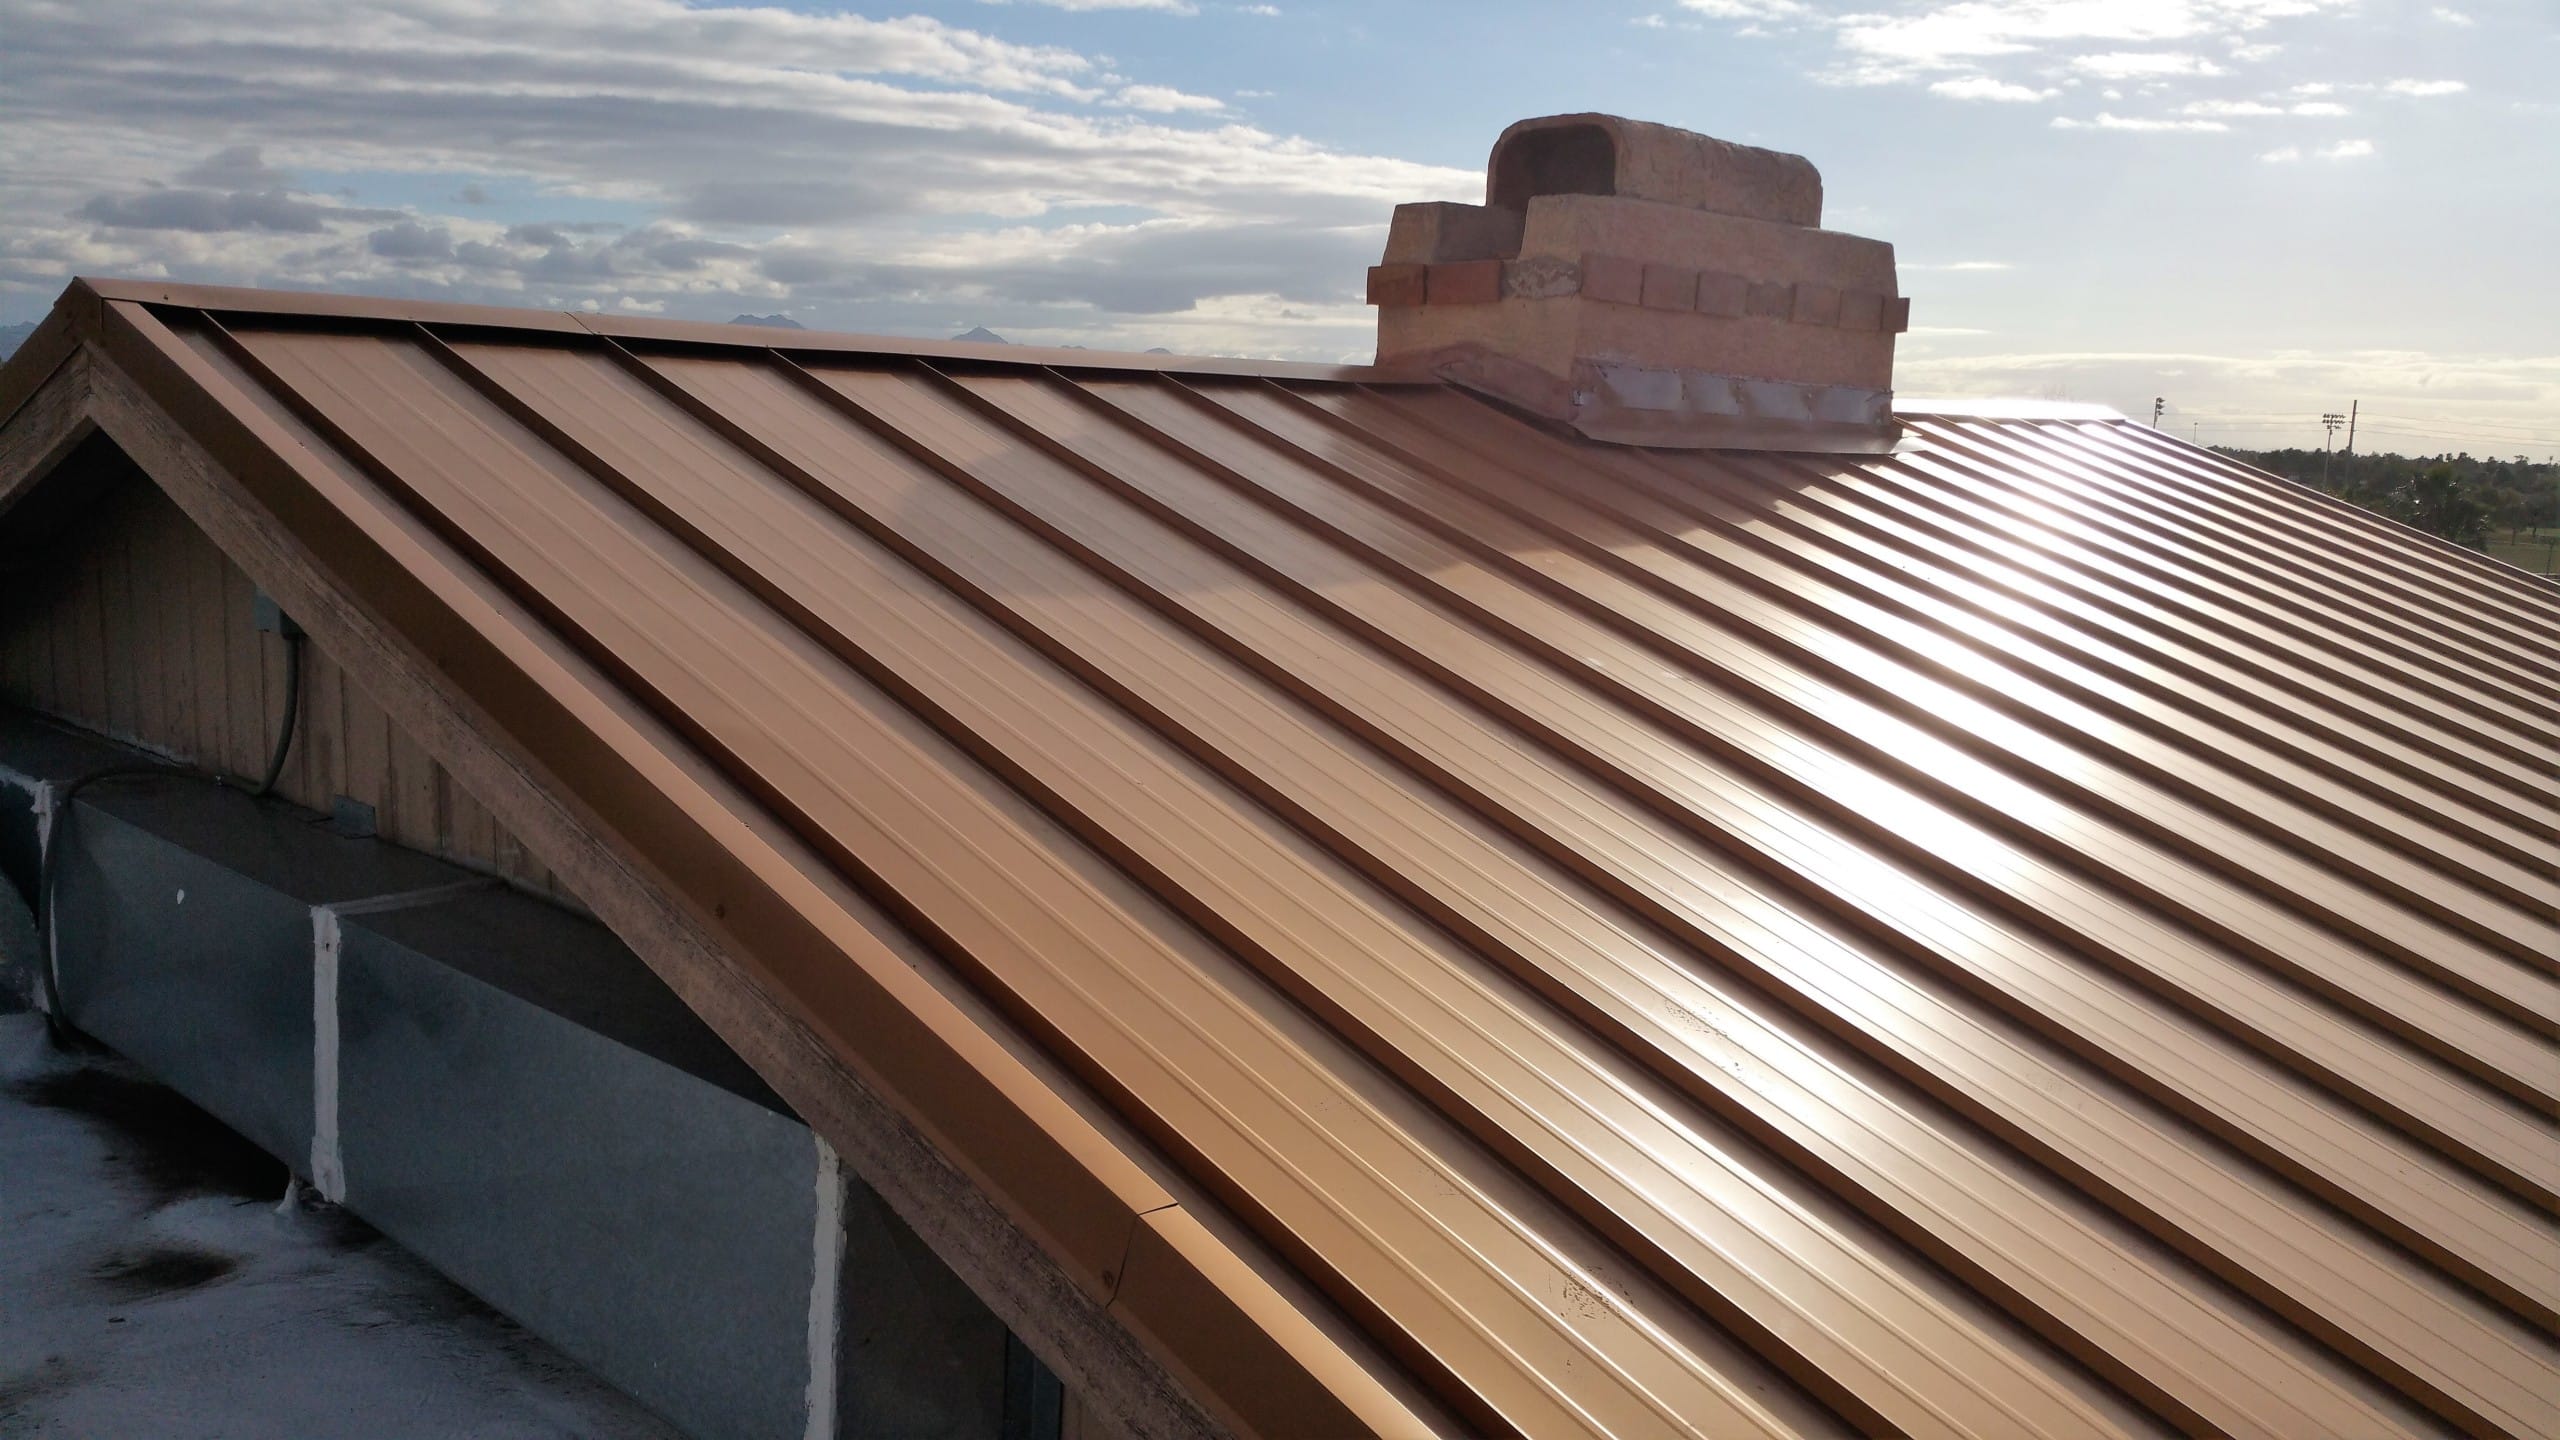 Standing Seam Metal Roof installed by Canyon State Roofing in Phoenix, AZ